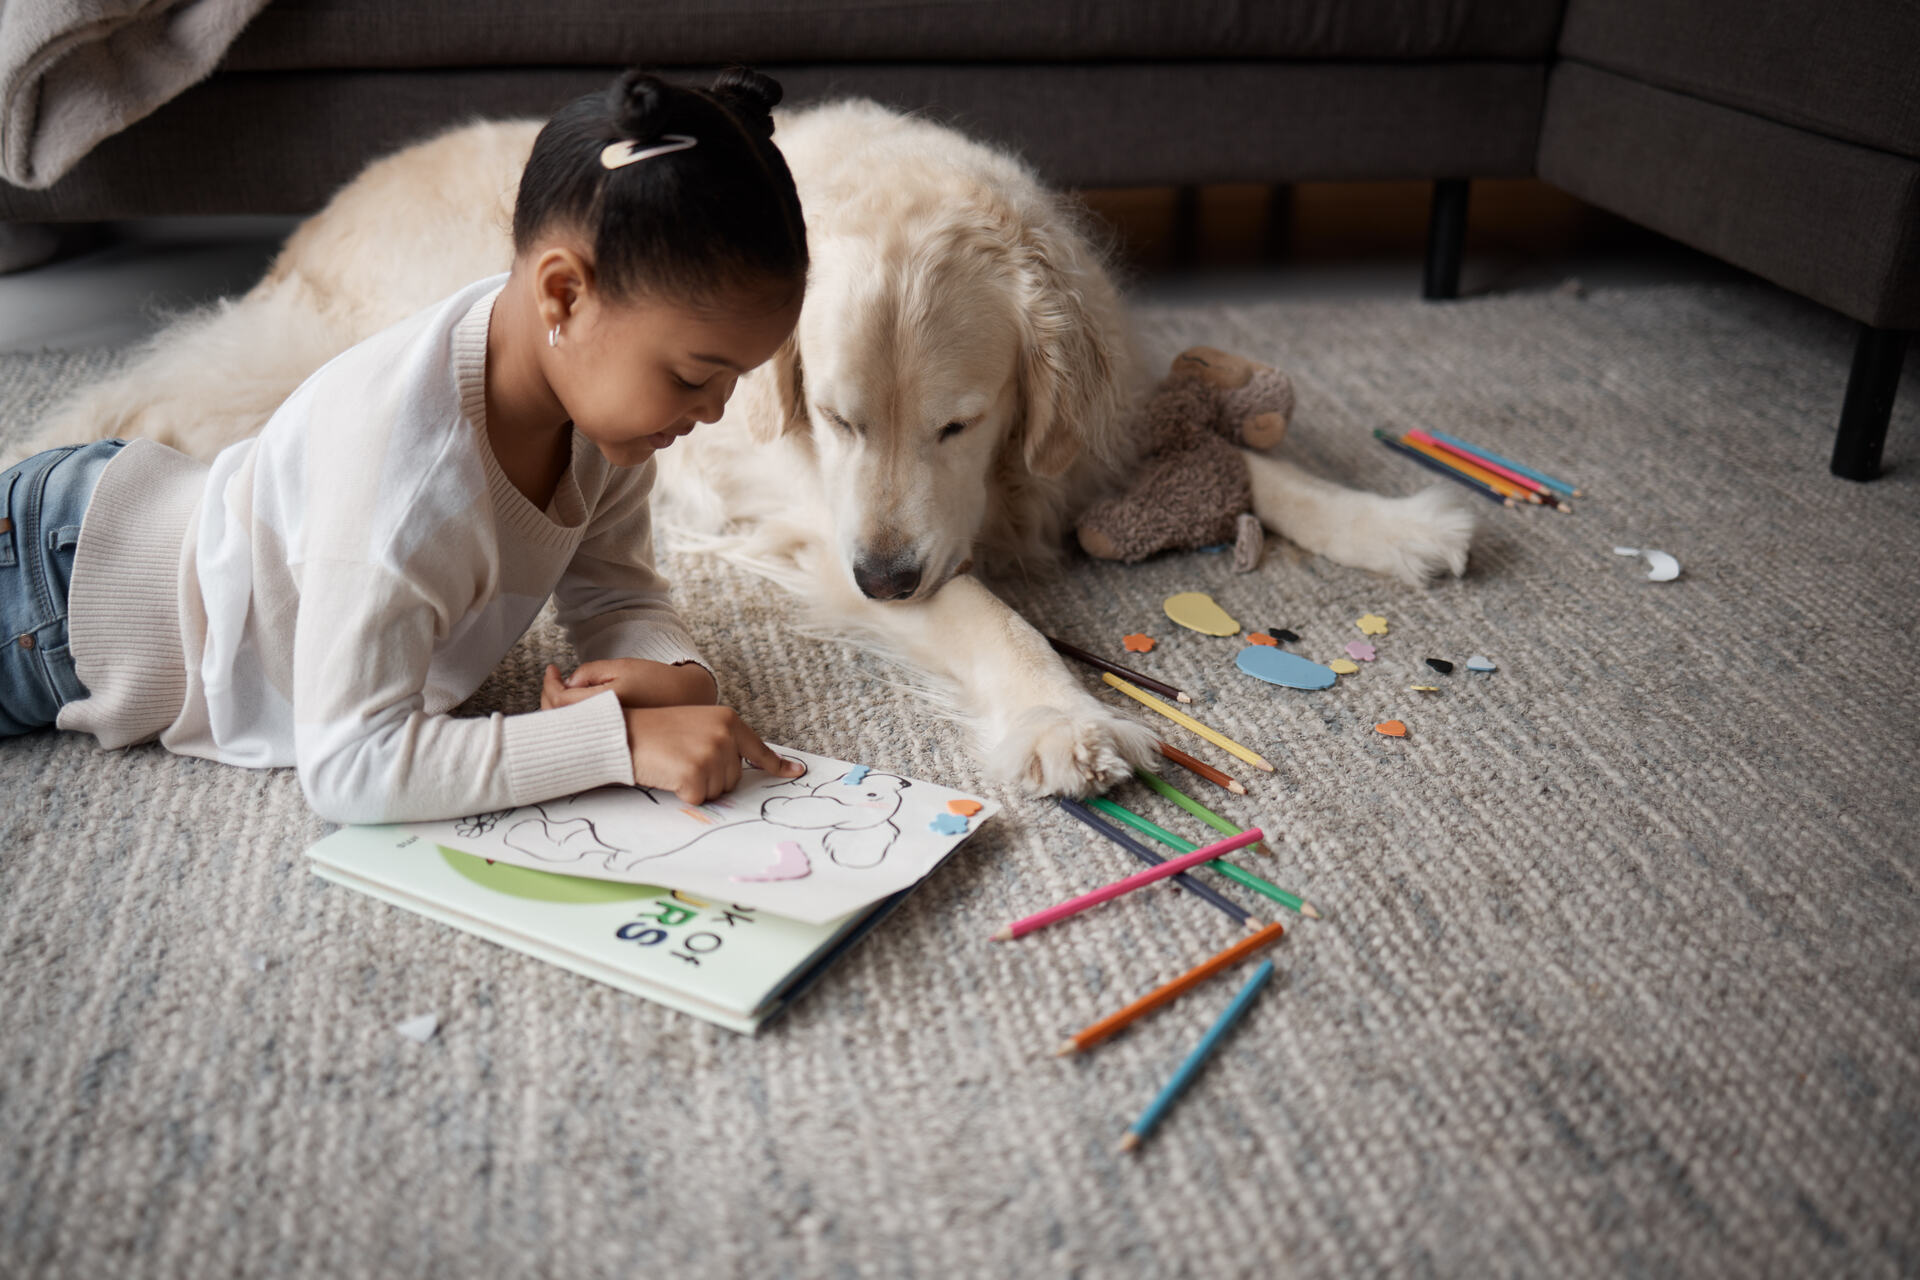 A little girl coloring a page in her box next to a dog